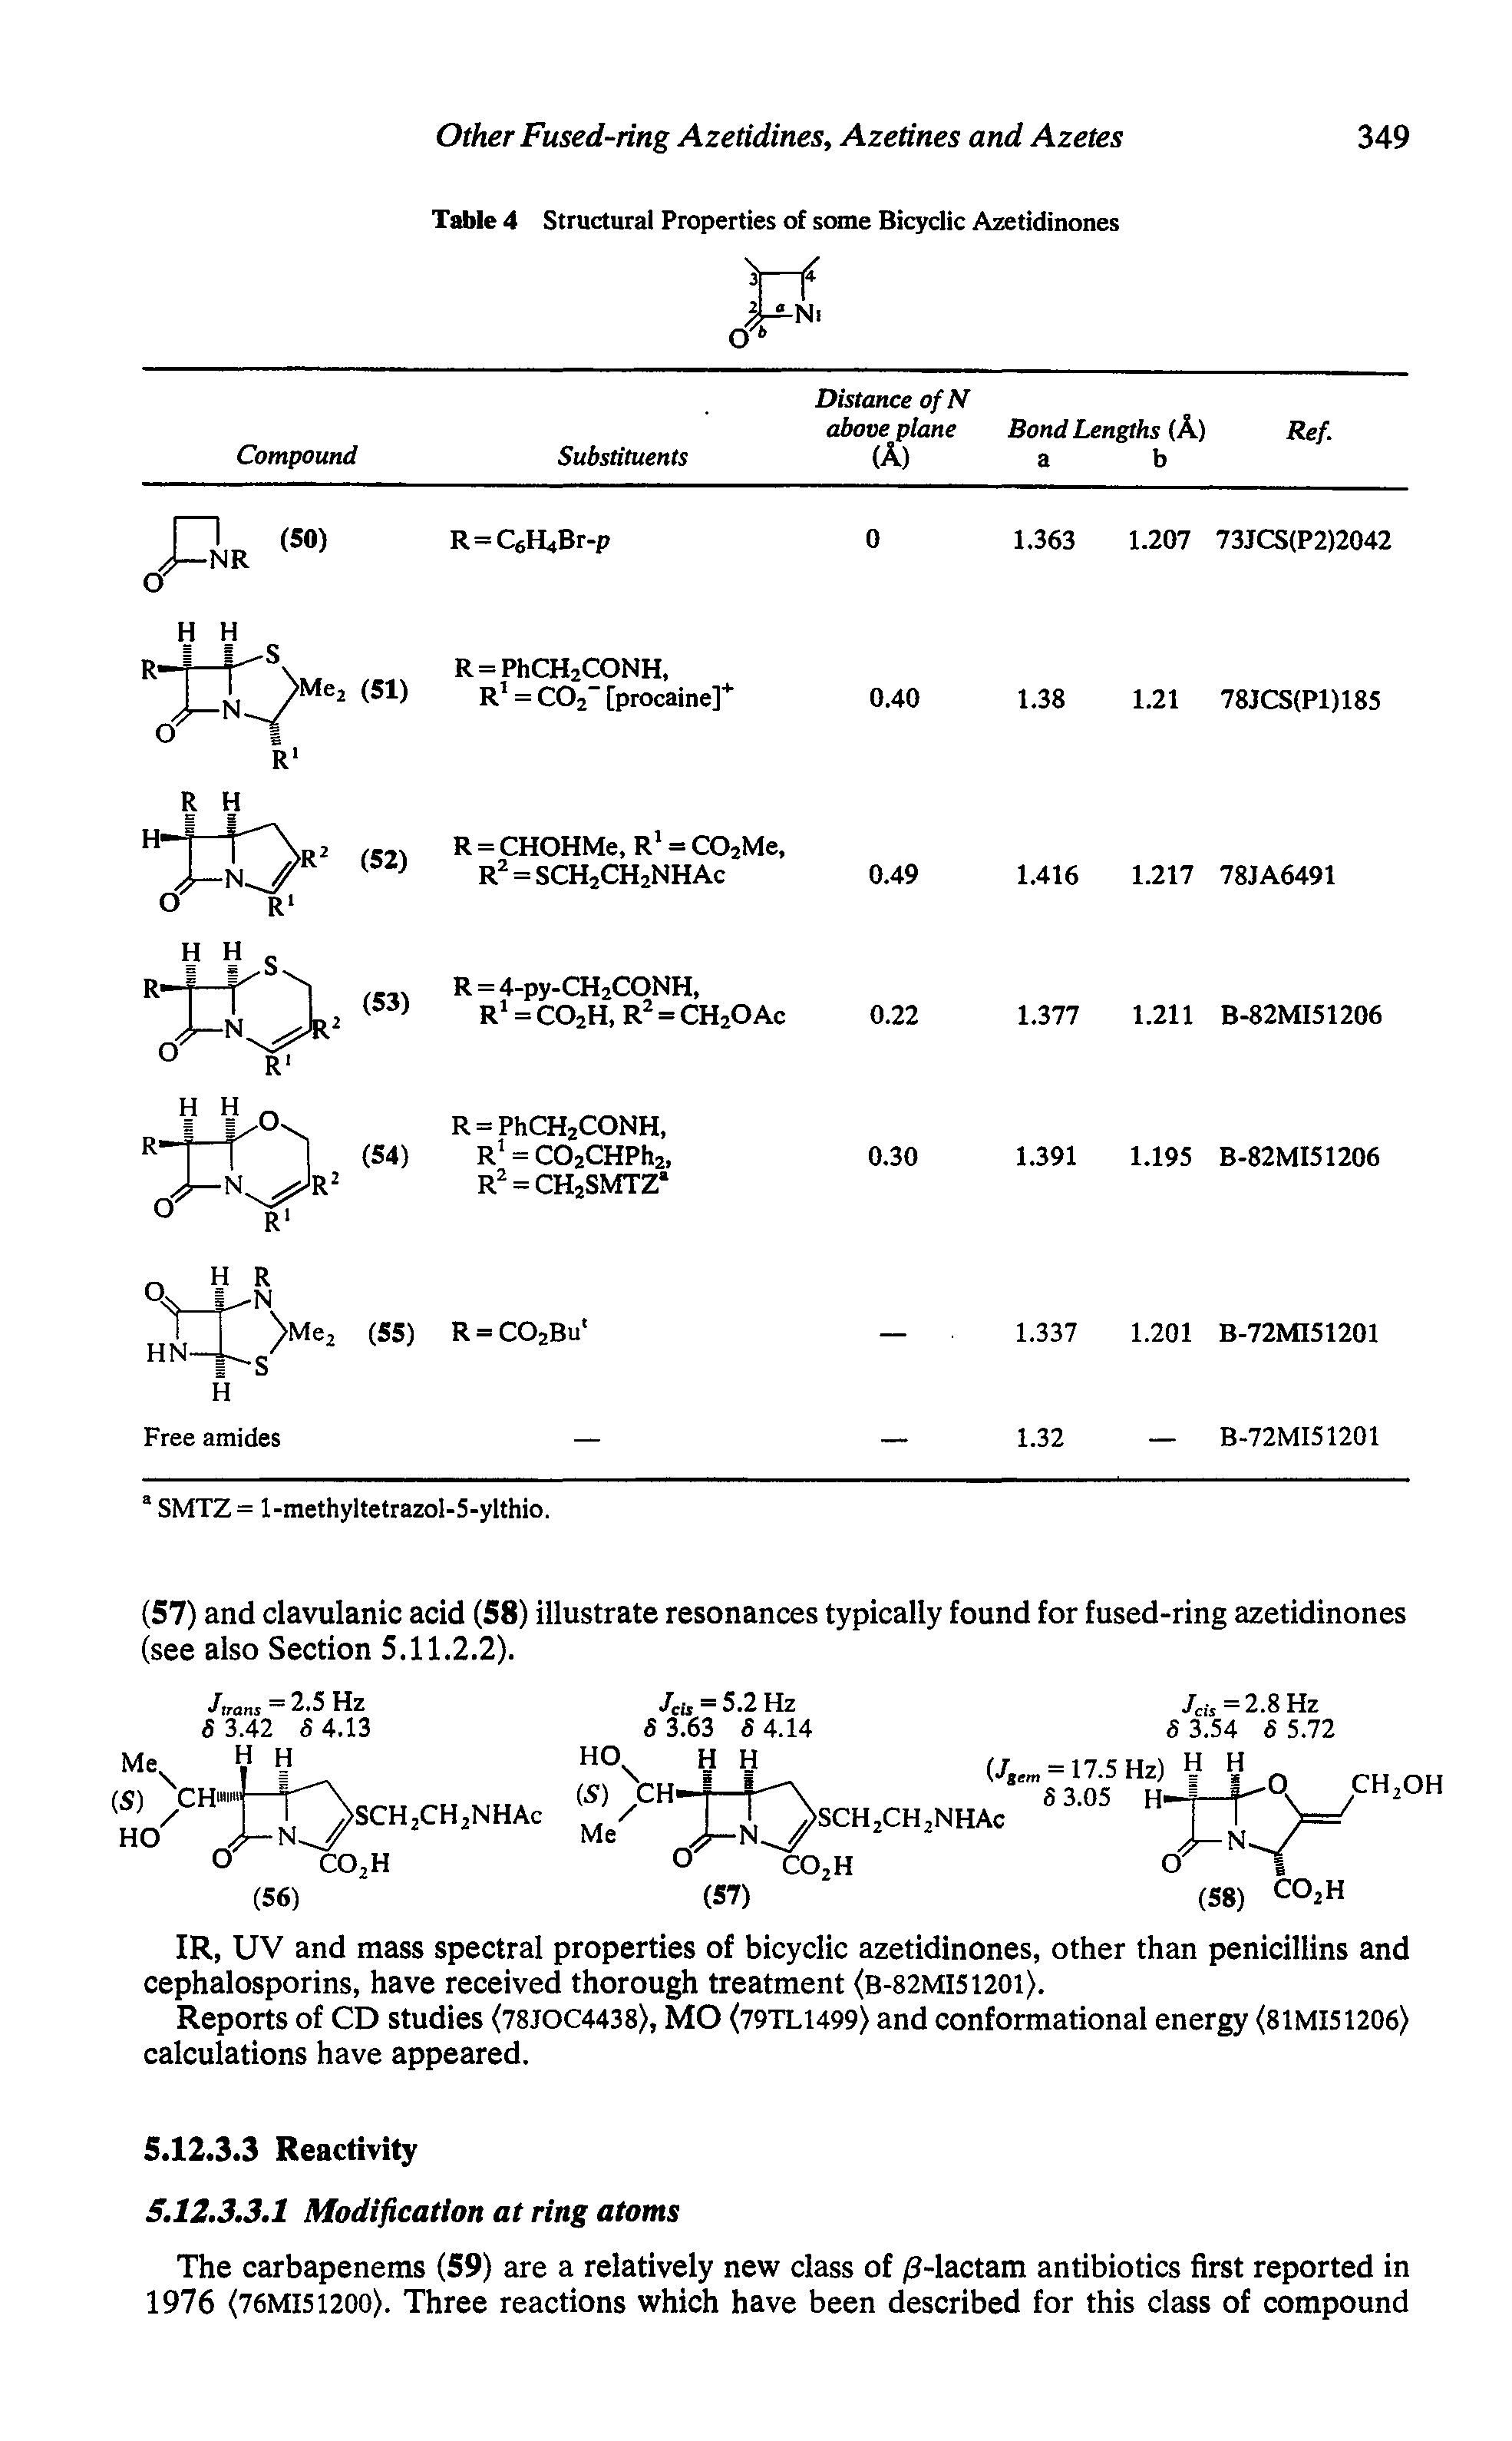 Table 4 Structural Properties of some Bicyclic Azetidinones...